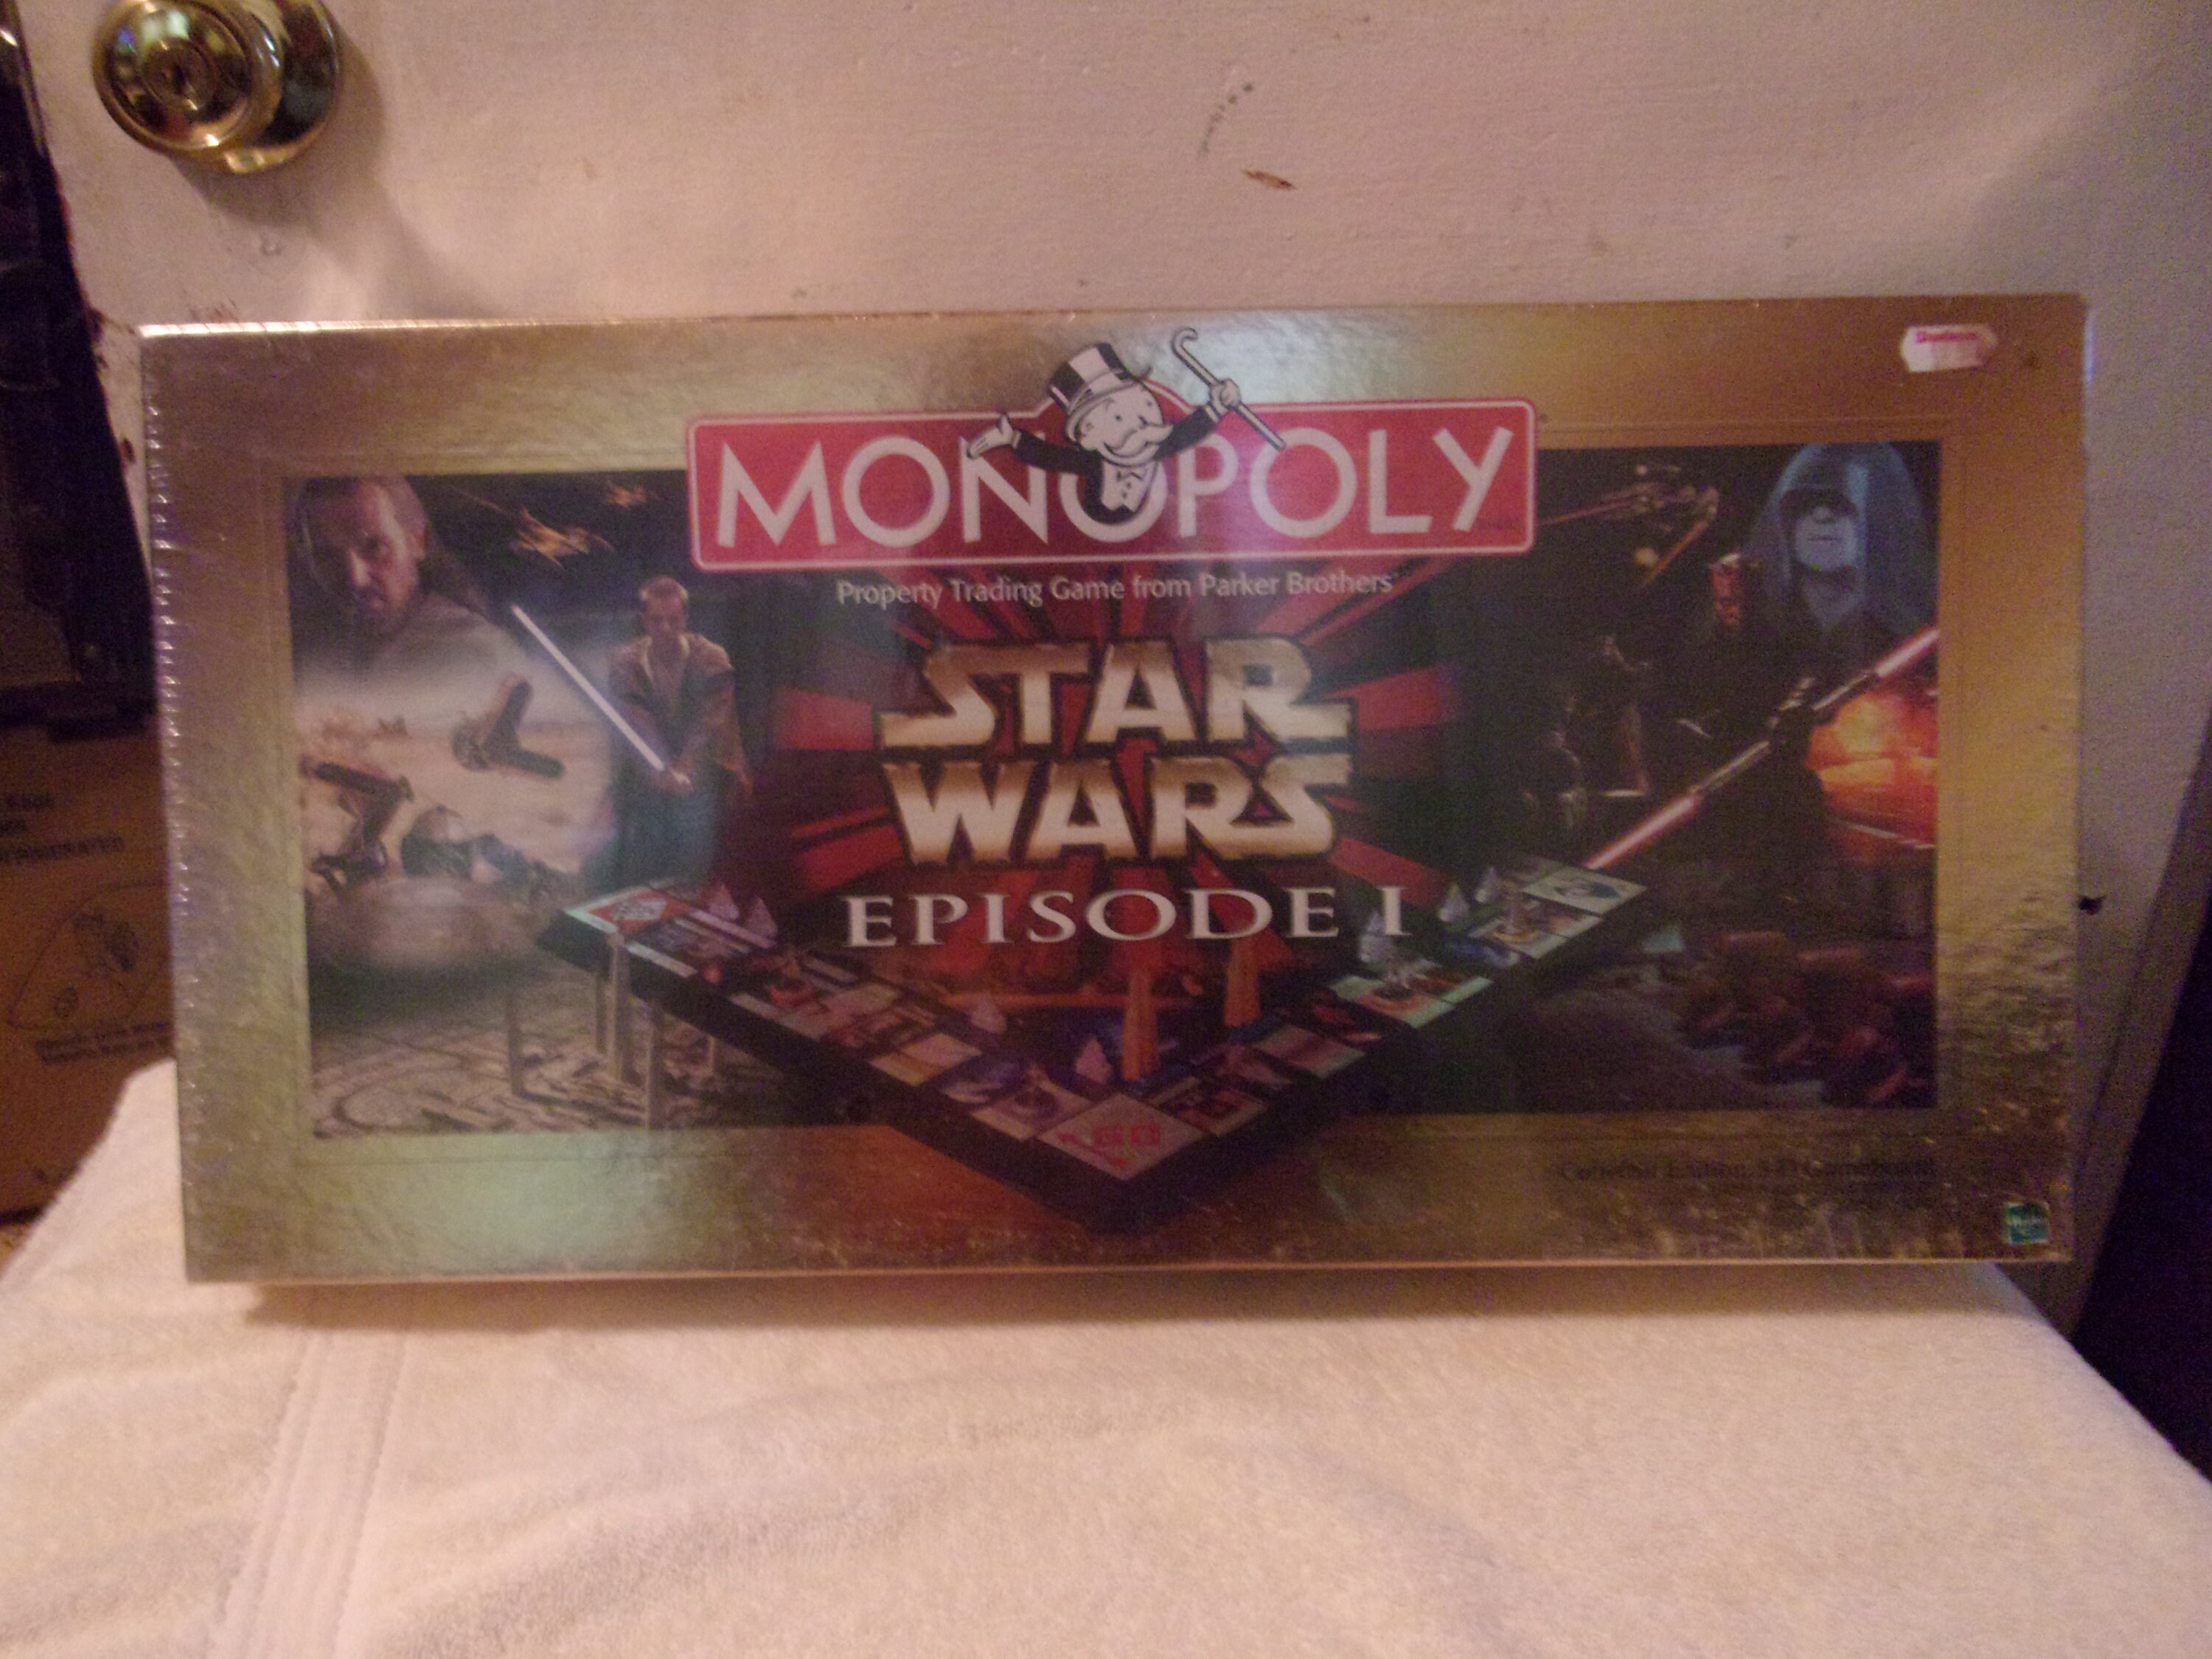 1999 Star Wars Episode 1 Monopoly Game Collector Edition 3d Hasbro Parker Bros for sale online 